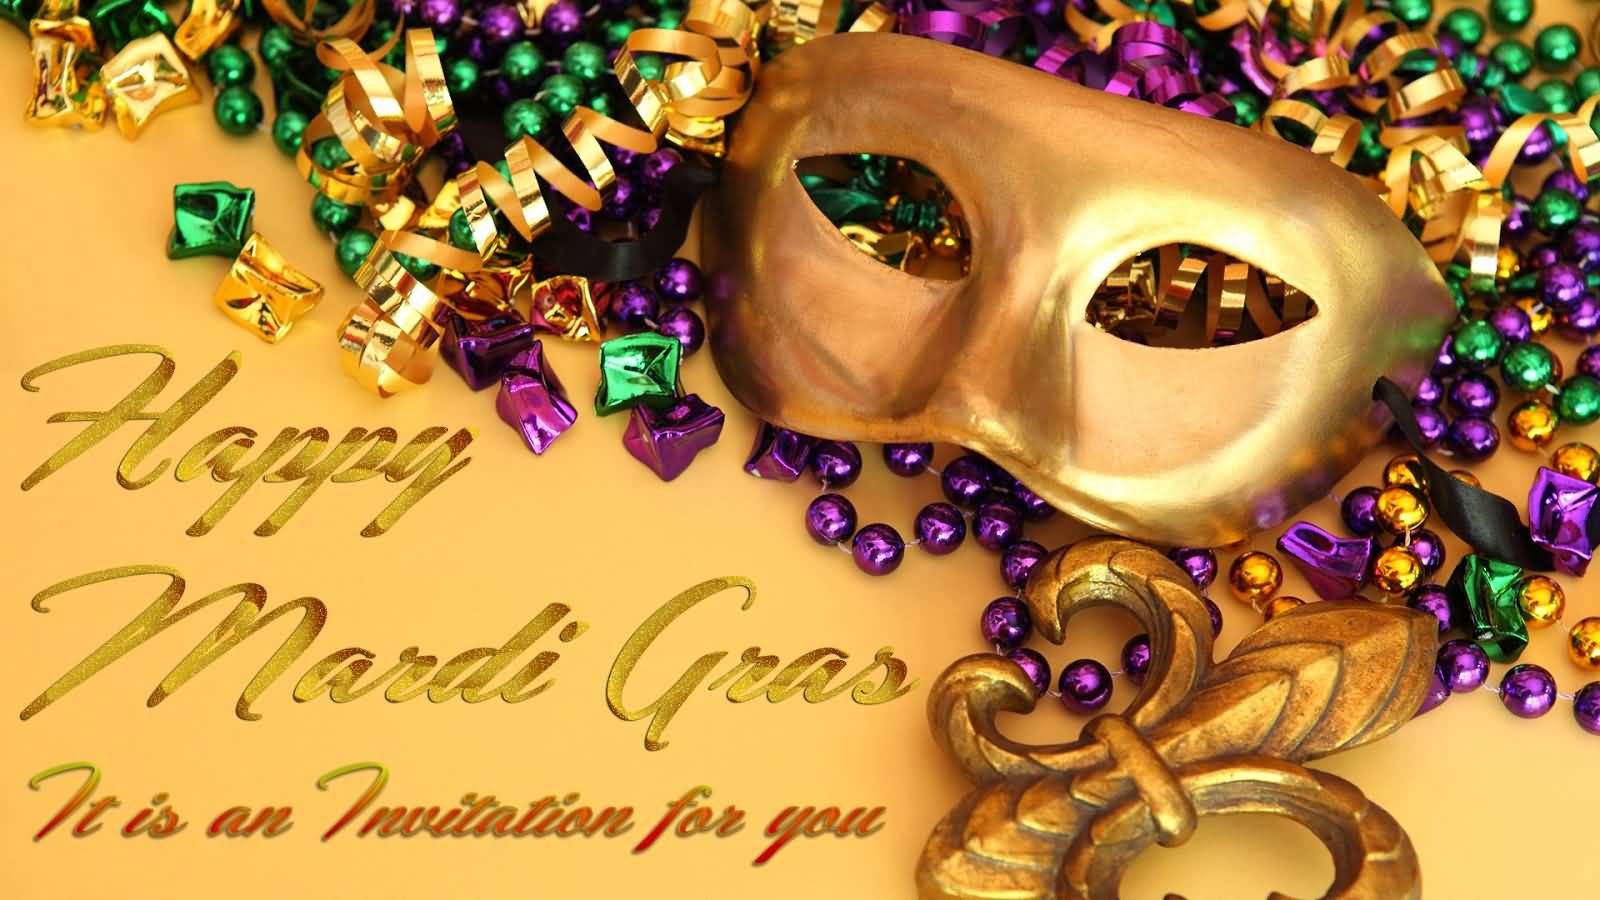 Happy Mardi Gras It Is An Invitation For You Greeting Card